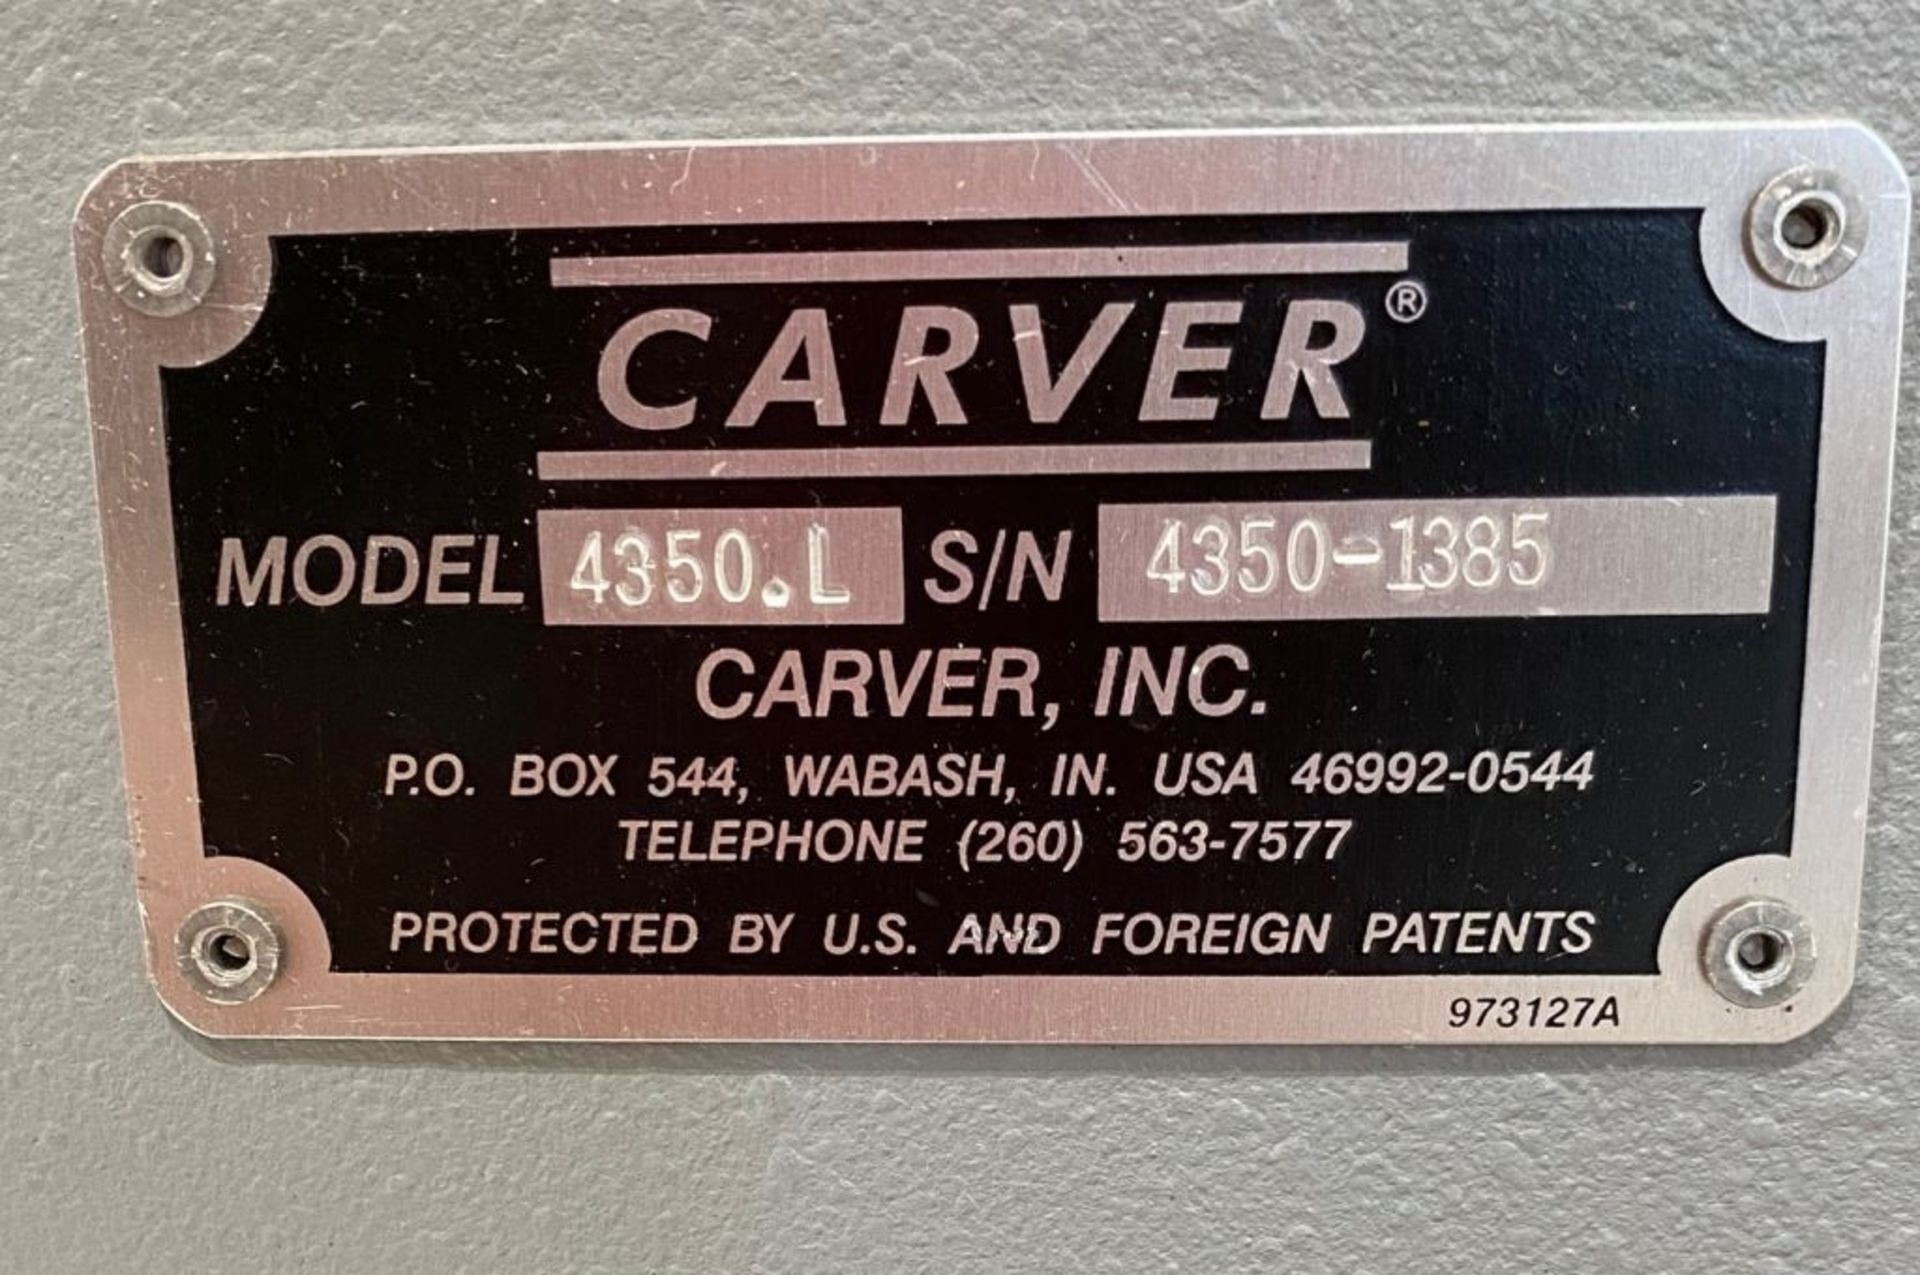 Carver Press, Model: 4350.L. This listing is only available to USA Customers only. DEA Paperwork - Image 3 of 3